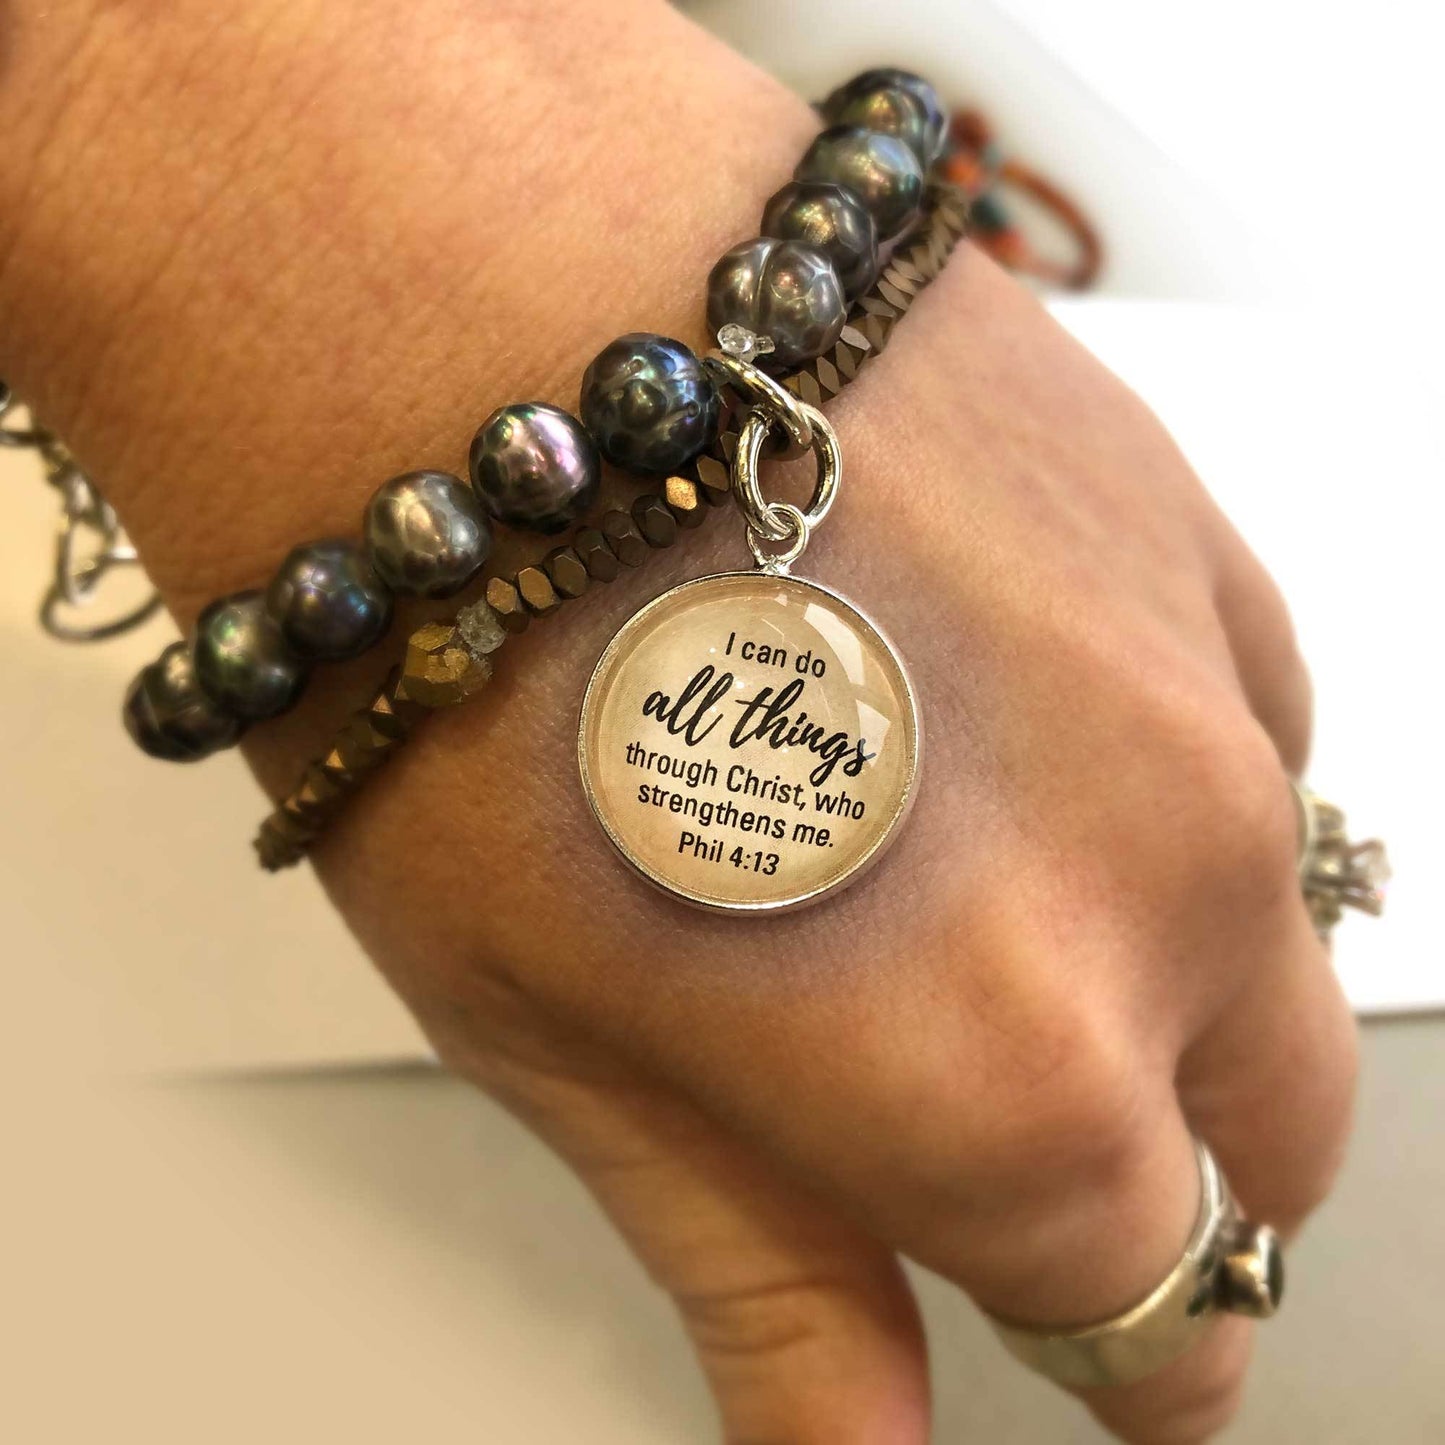 I Can Do All Things Through Christ - Phil 4:13 Scripture Charm